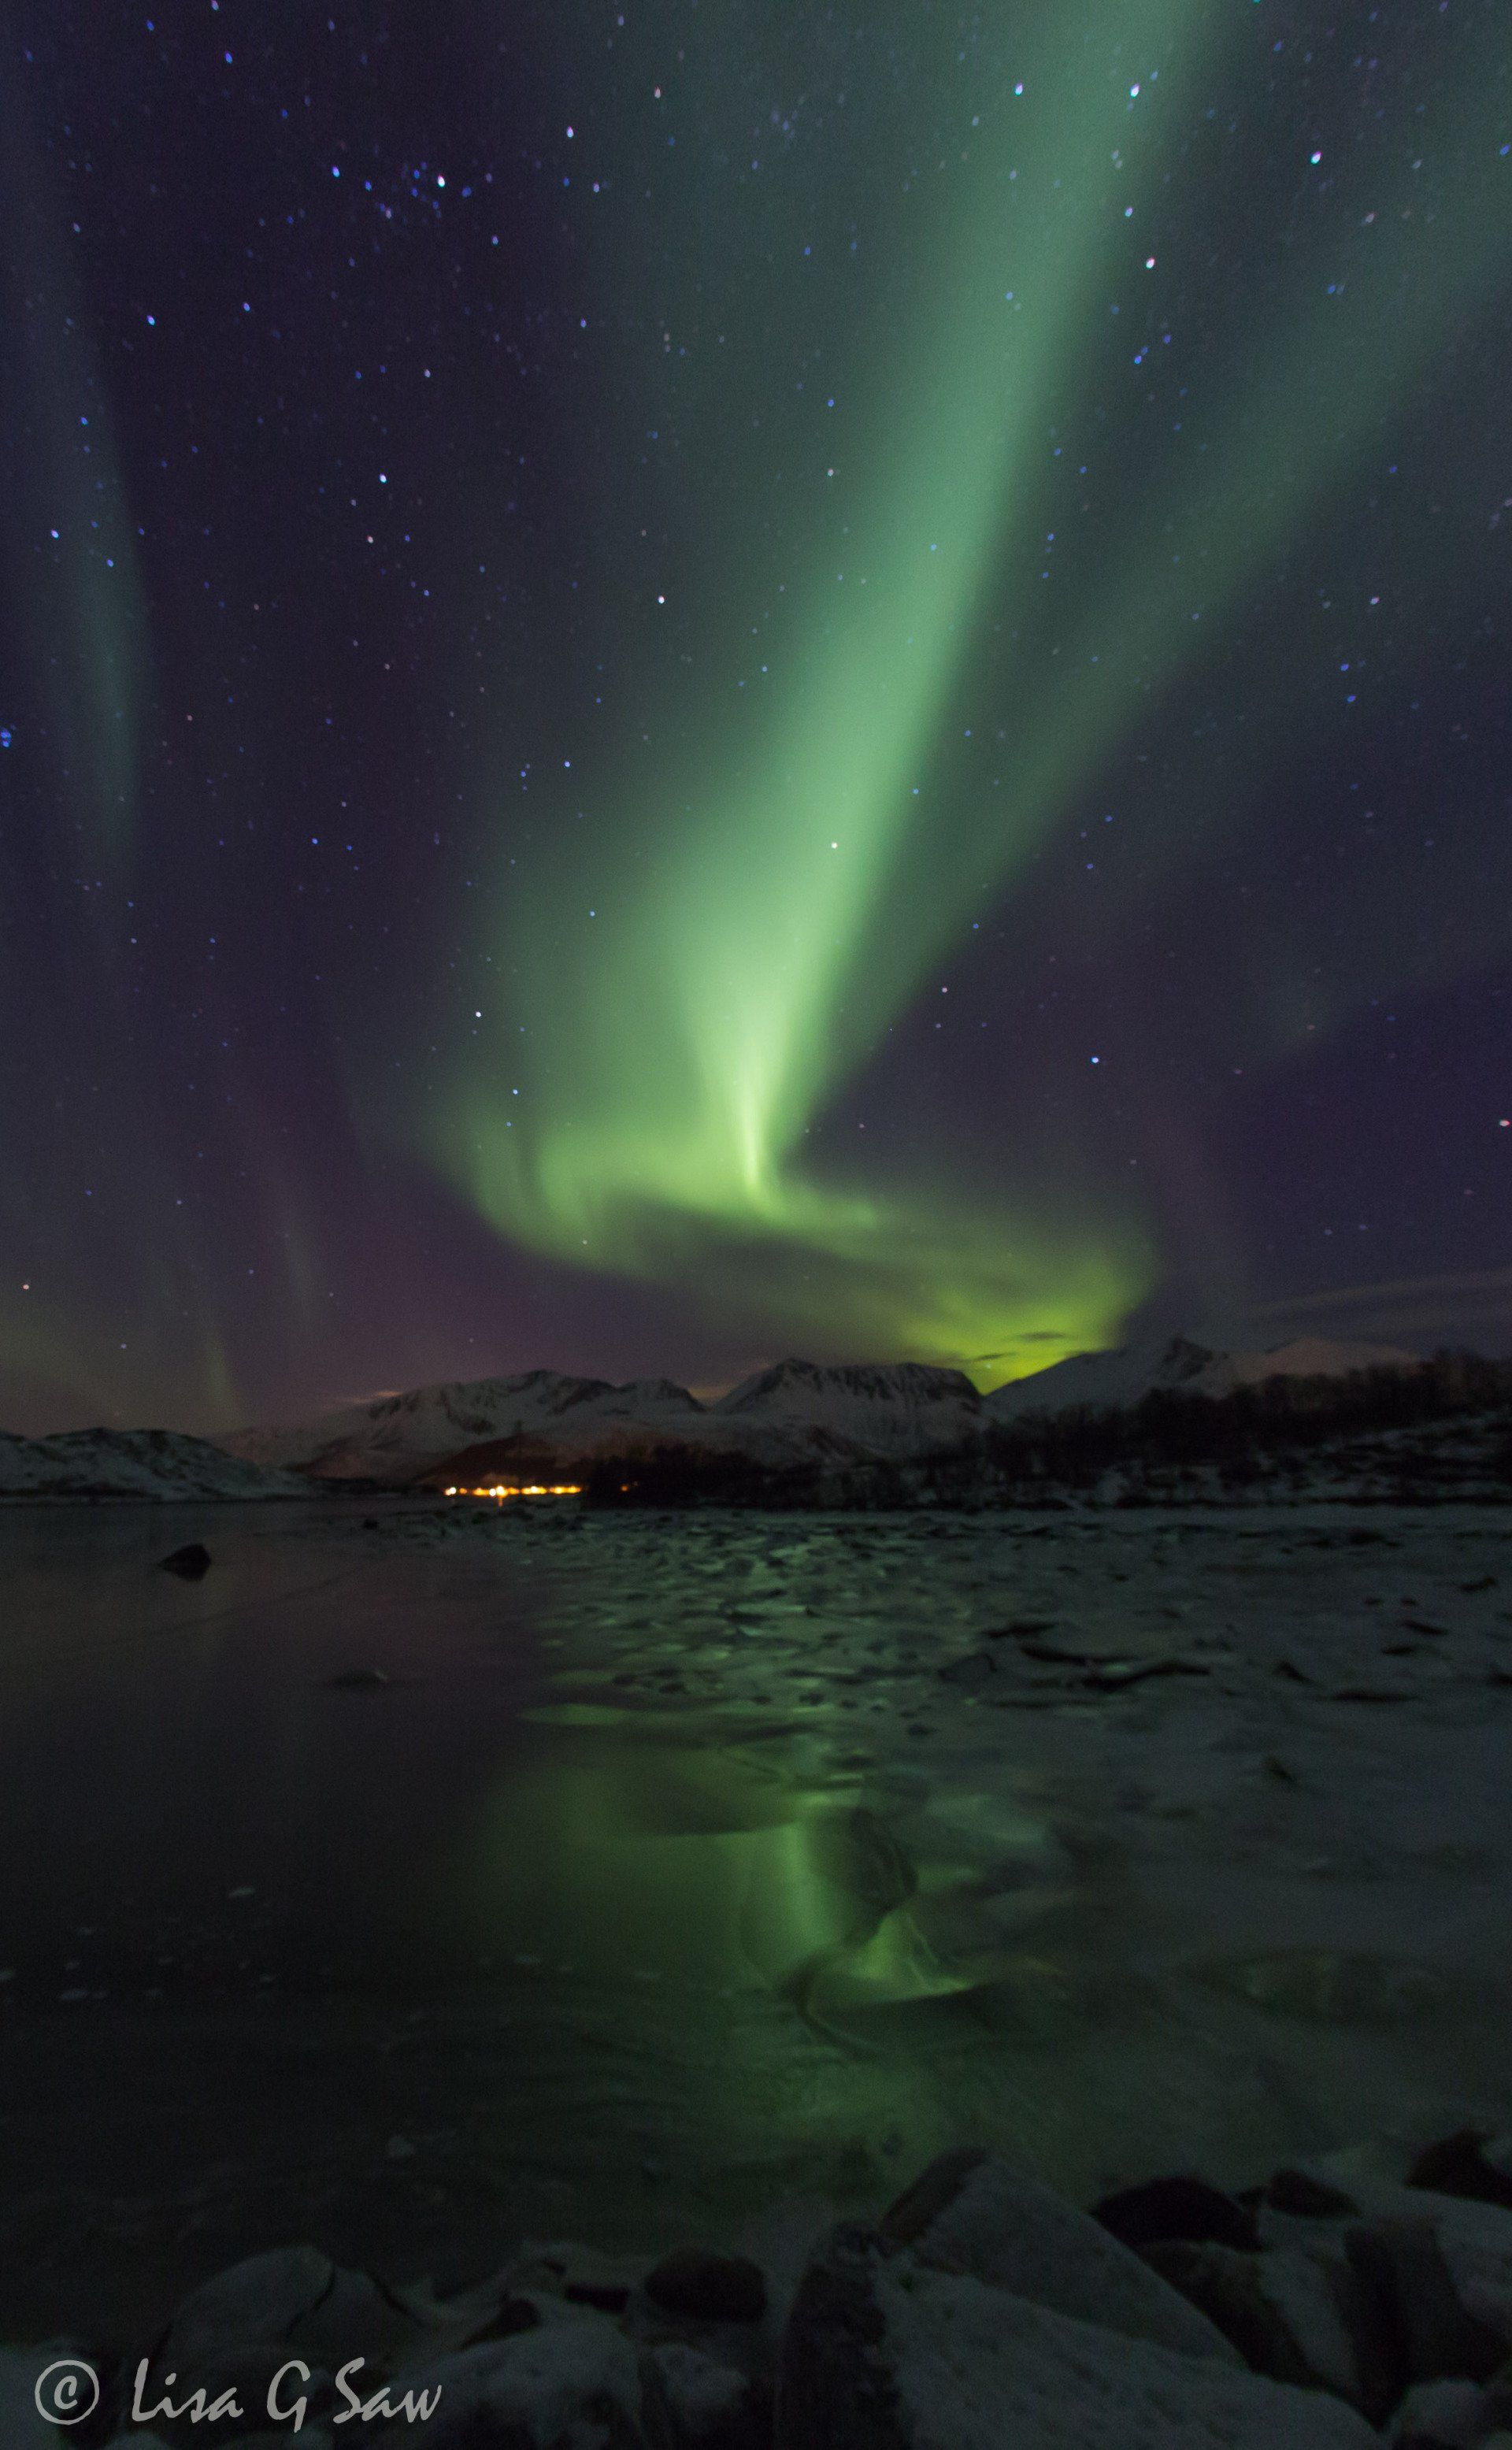 Northern Lights reflecting on ice and with town lights, Norway